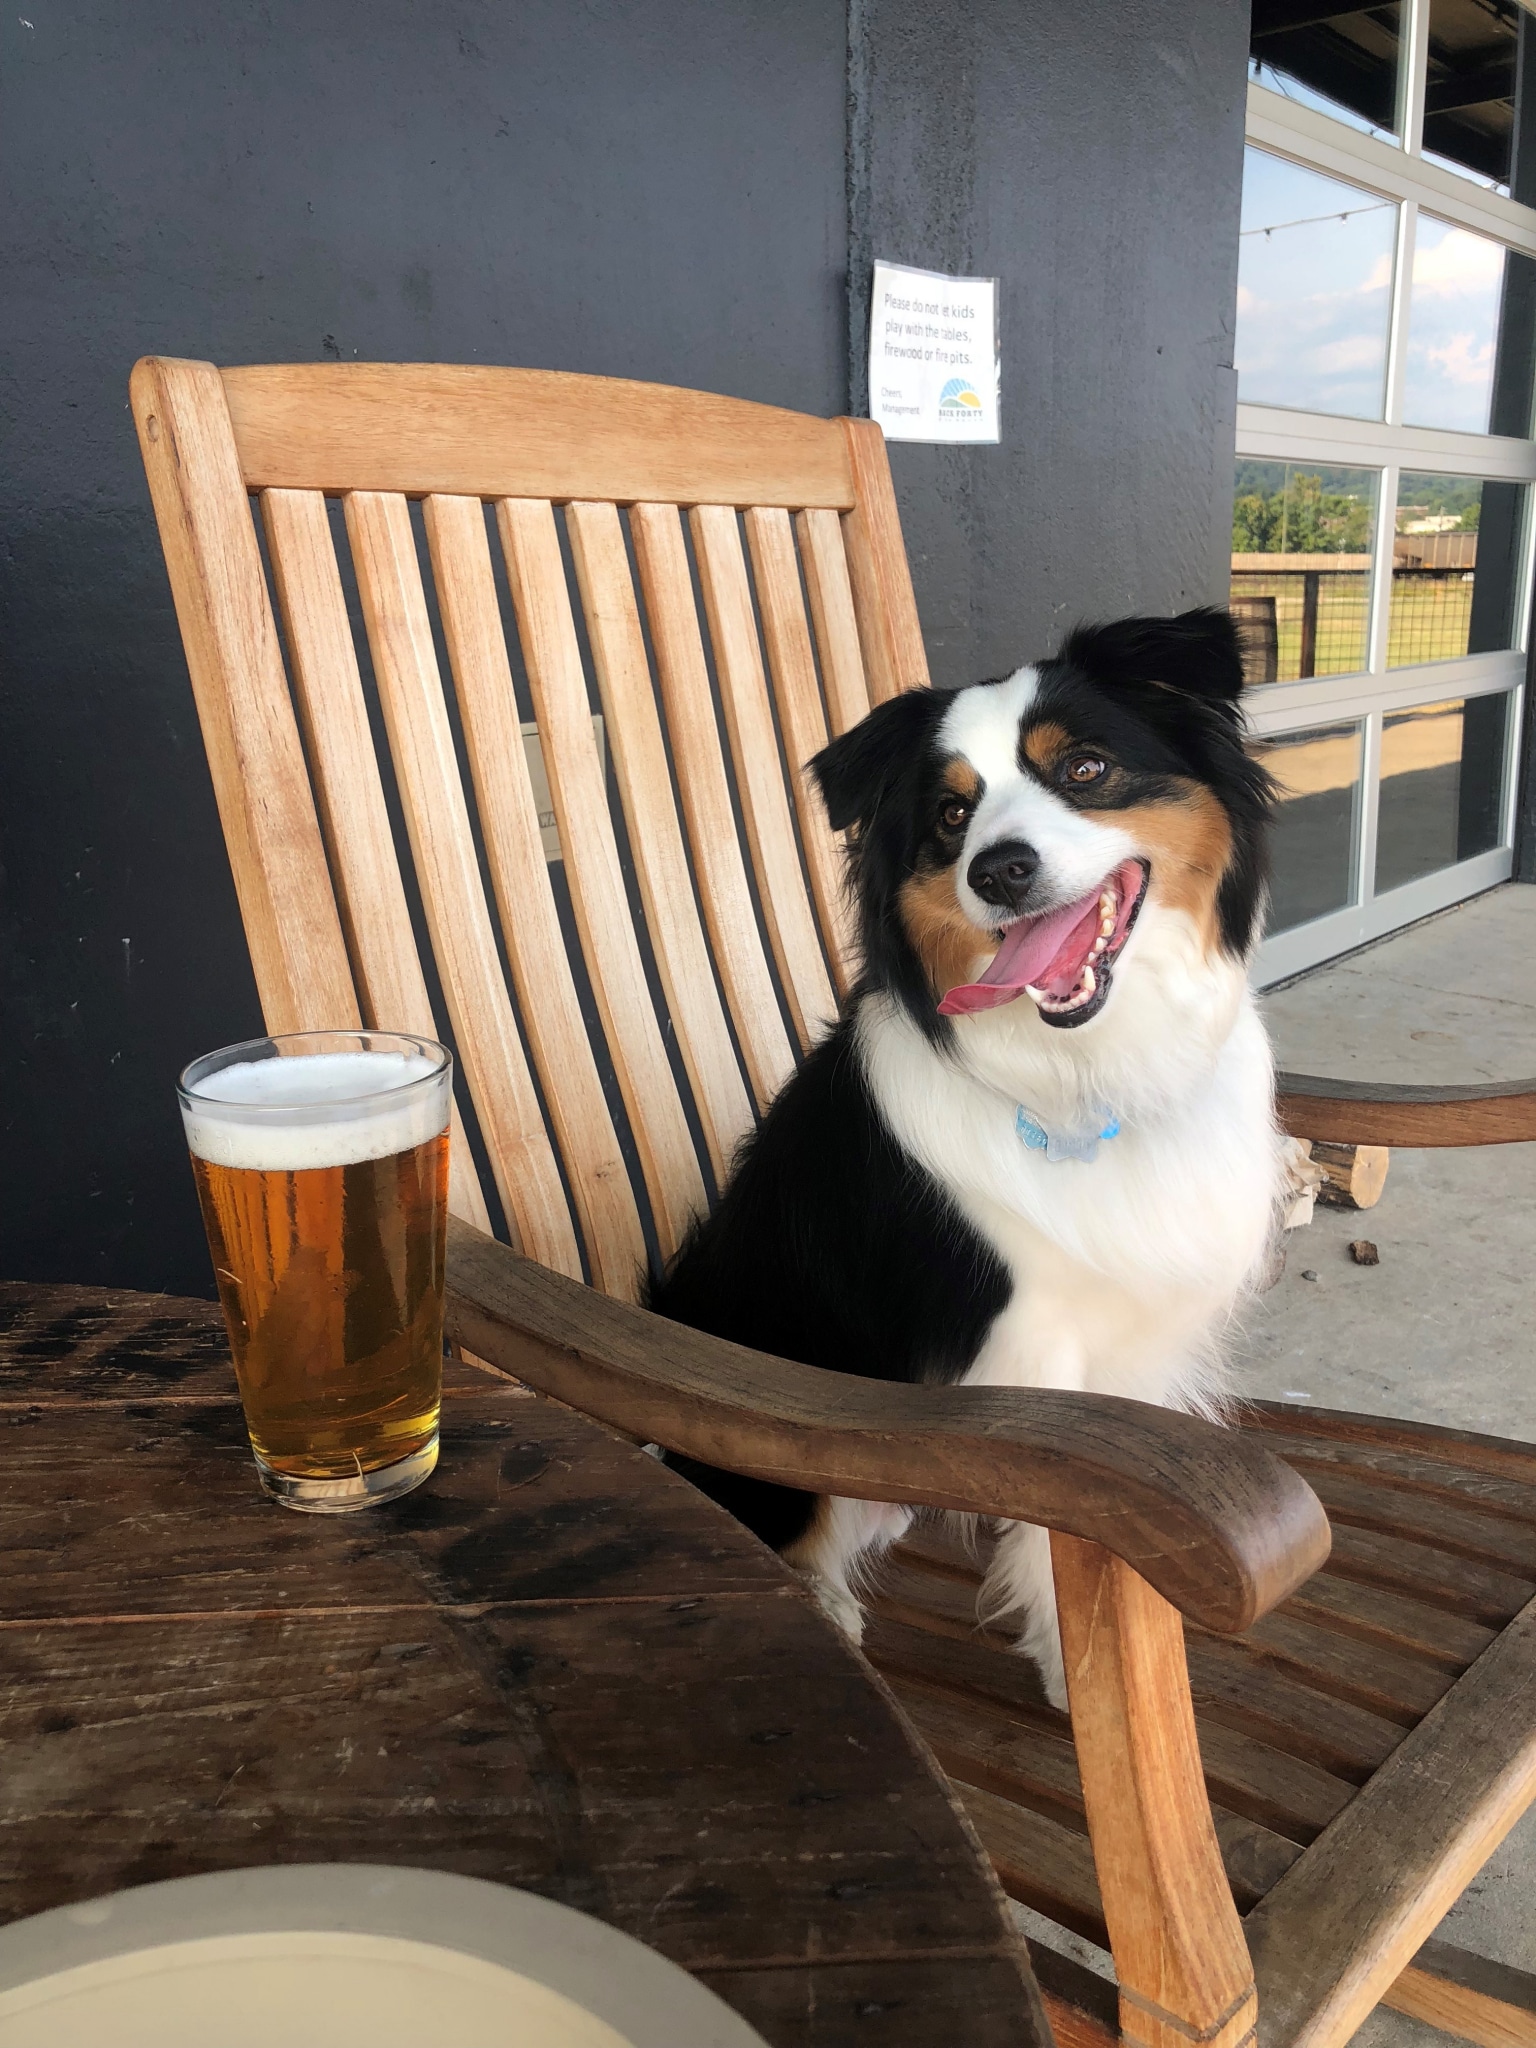 Coopers Back Forty Dinner with the dogs: 15 spots with outdoor dining in Birmingham [CUTE DOG PHOTOS]